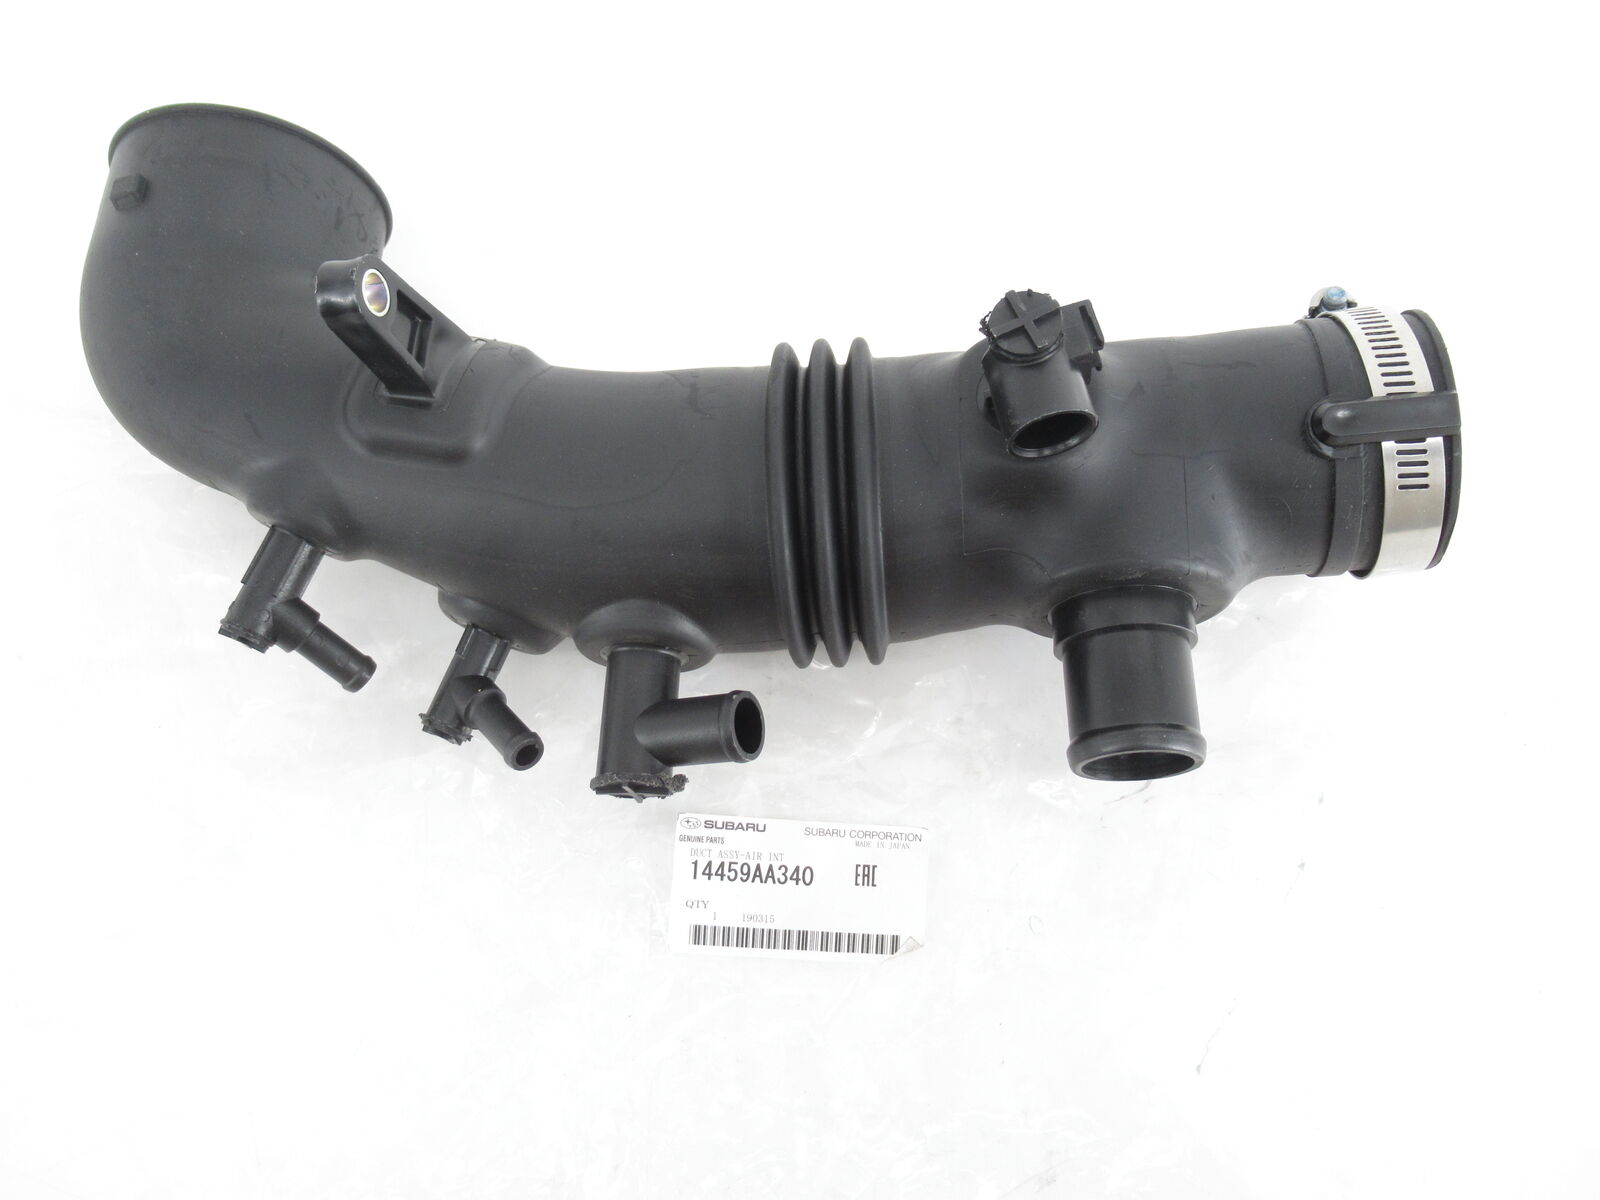 Genuine OEM Subaru 14459AA340 Air Intake Duct Assembly 2005-06 Legacy & Outback